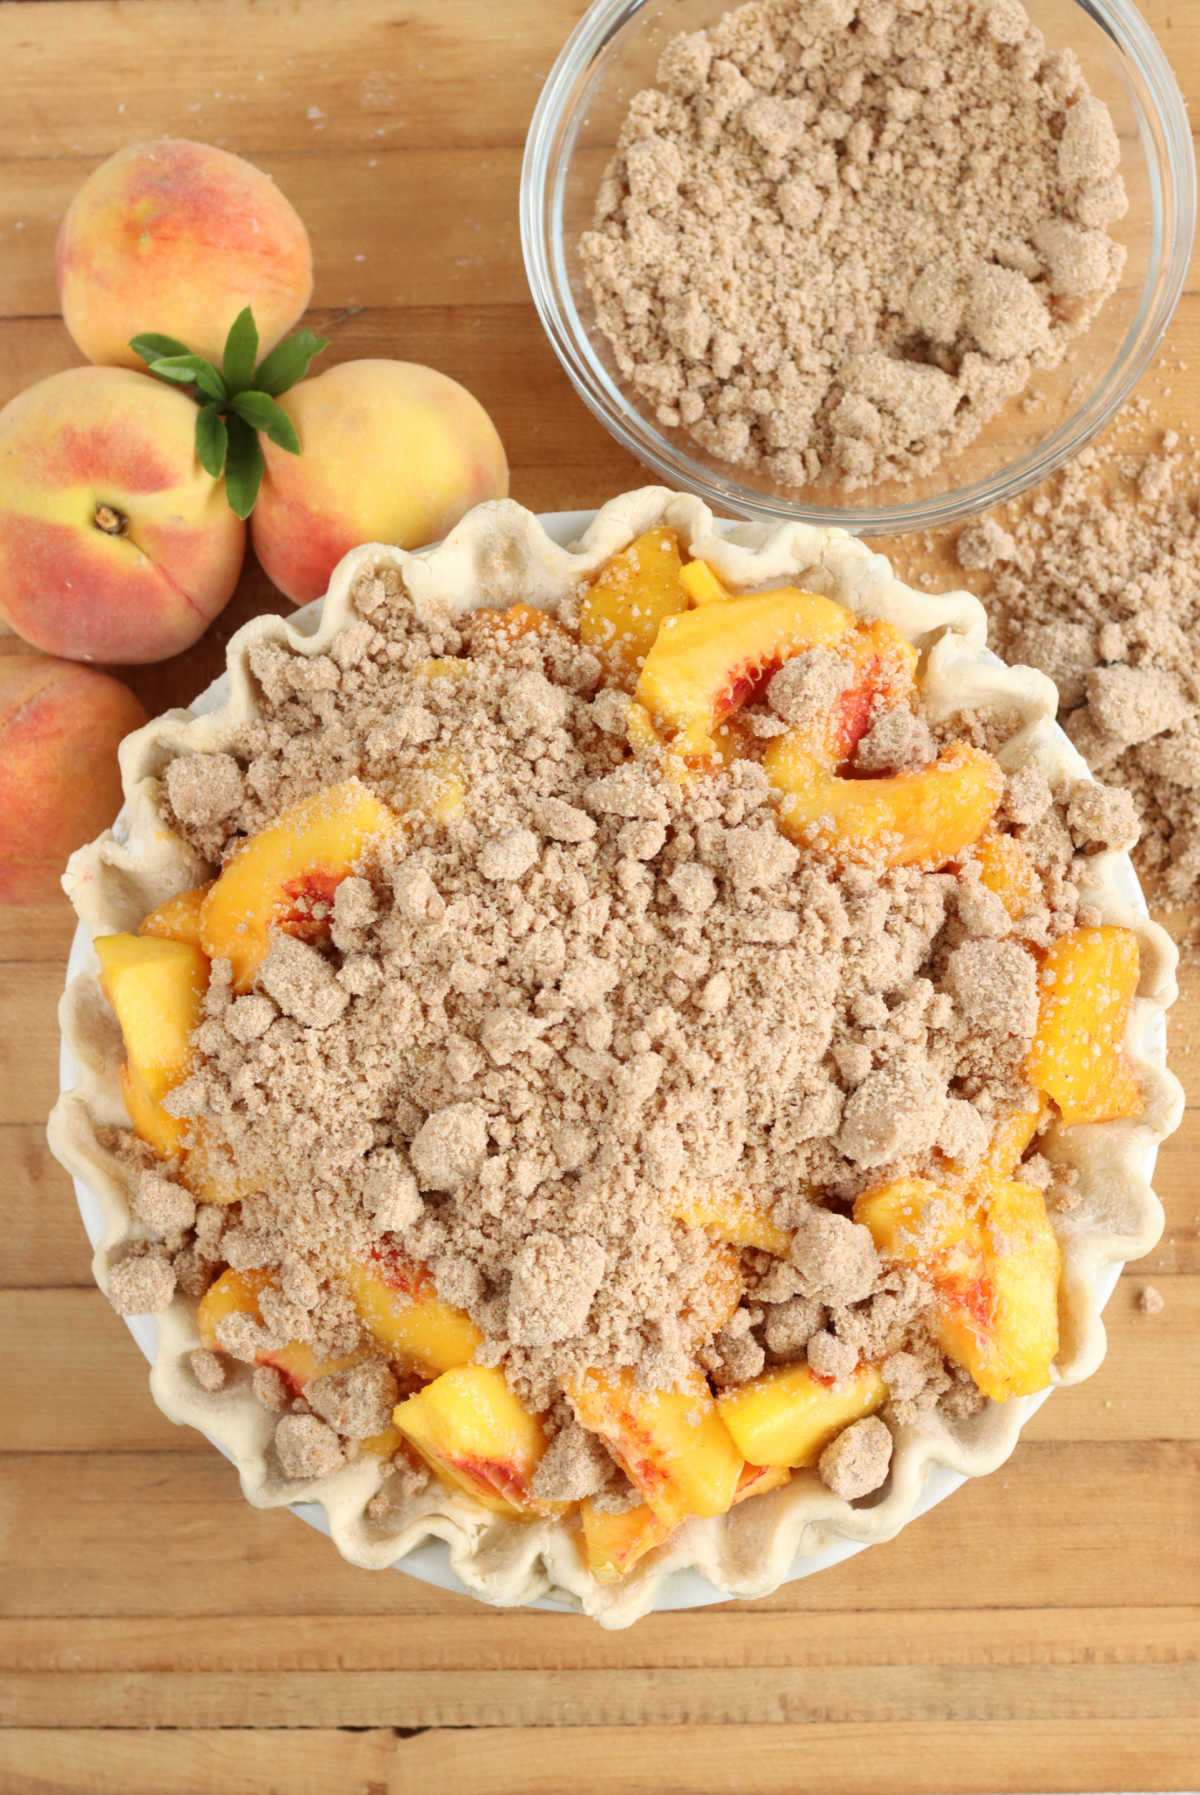 Unbaked peach pie with crumb topping on butcher block, fresh peaches around, clear glass bowl of crumb topping.